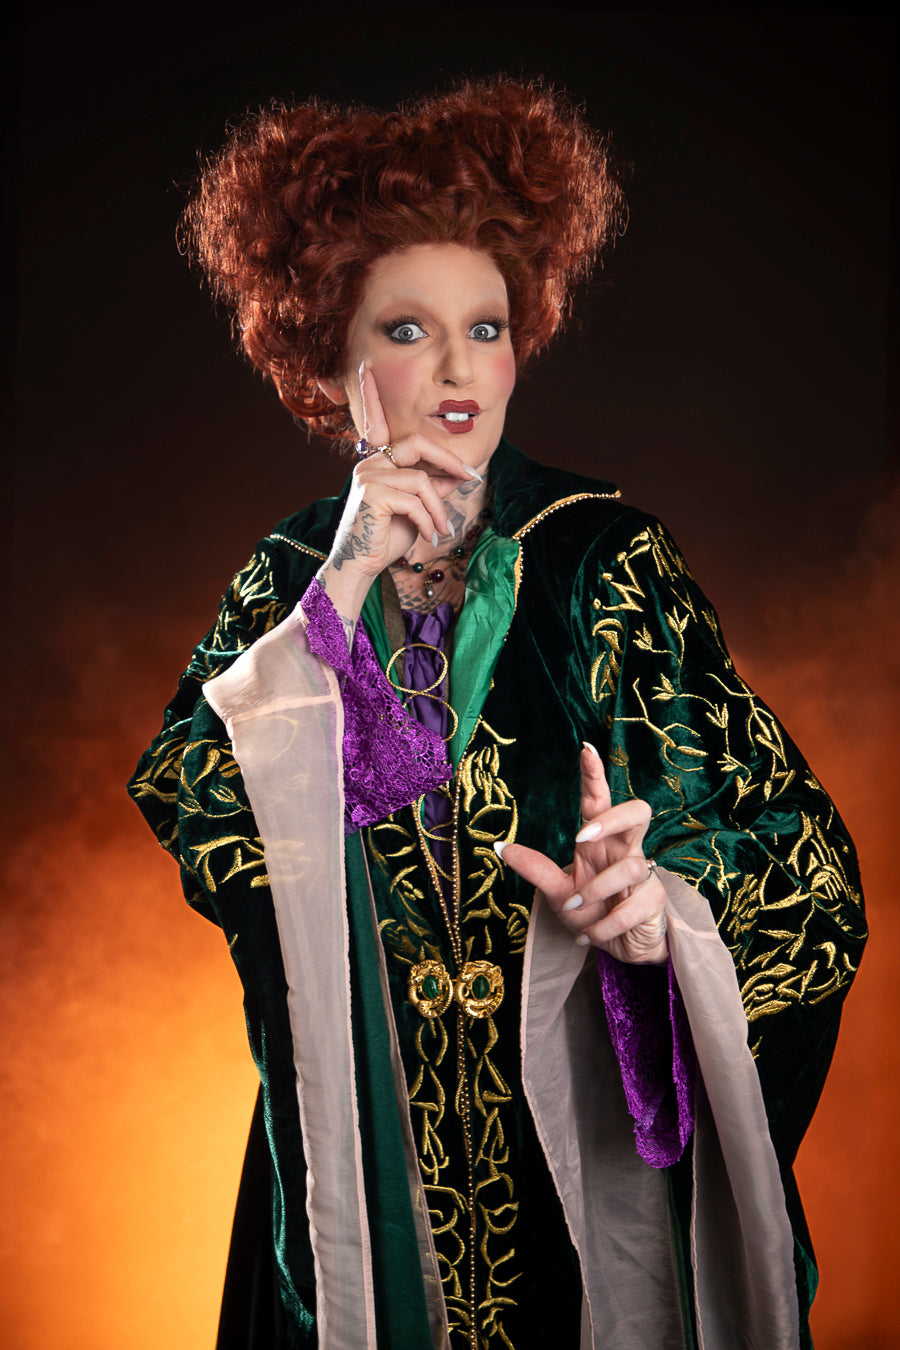 Hocus Pocus Winnifred Sanderson Costume Hire or Cosplay. Exquisite replica costume from the iconic film, Hocus Pocus. Stunning and skillfully embroidered velvet cloak with draping sleeves, dress, brooches, custom styled lace front character wig and broomstick. Absolutely one of a kind, designed by and exclusive to Little Shop of Horrors. 6/1 Watt Rd Mornington, Frankston Melbourne